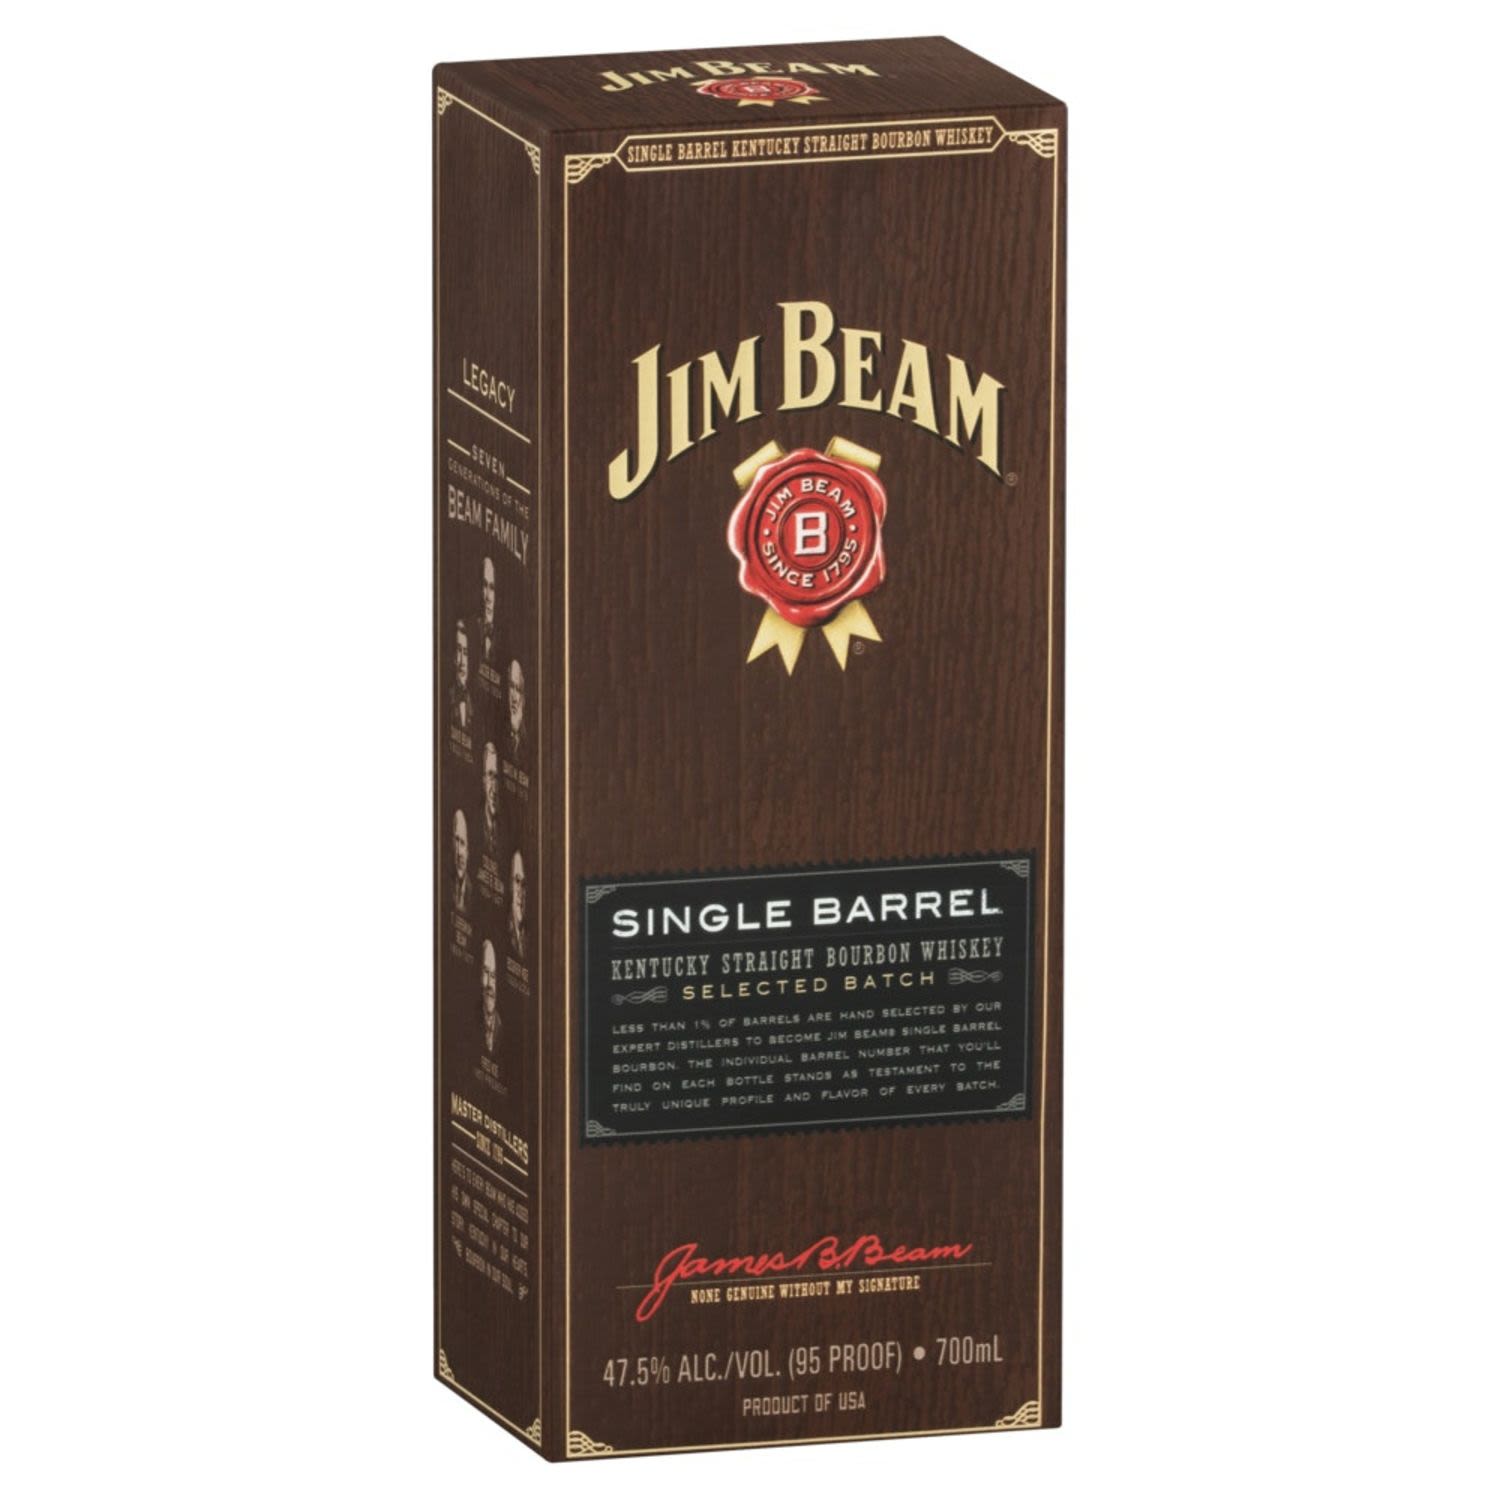 Every bottle of Jim Beam Single Barrel is unique and perfect in its own way—both in the distinct flavour and personality of the liquid itself and the wisdom of our master distiller printed on the back. Hand selected by our expert distillers to become Jim Beam Single Barrel. Every bottle is individually labelled and hand numbered as a true testament to the unique flavour and profile of each batch.<br /> <br />Alcohol Volume: 47.50%<br /><br />Pack Format: Bottle<br /><br />Standard Drinks: 26</br /><br />Pack Type: Bottle<br /><br />Country of Origin: USA<br />